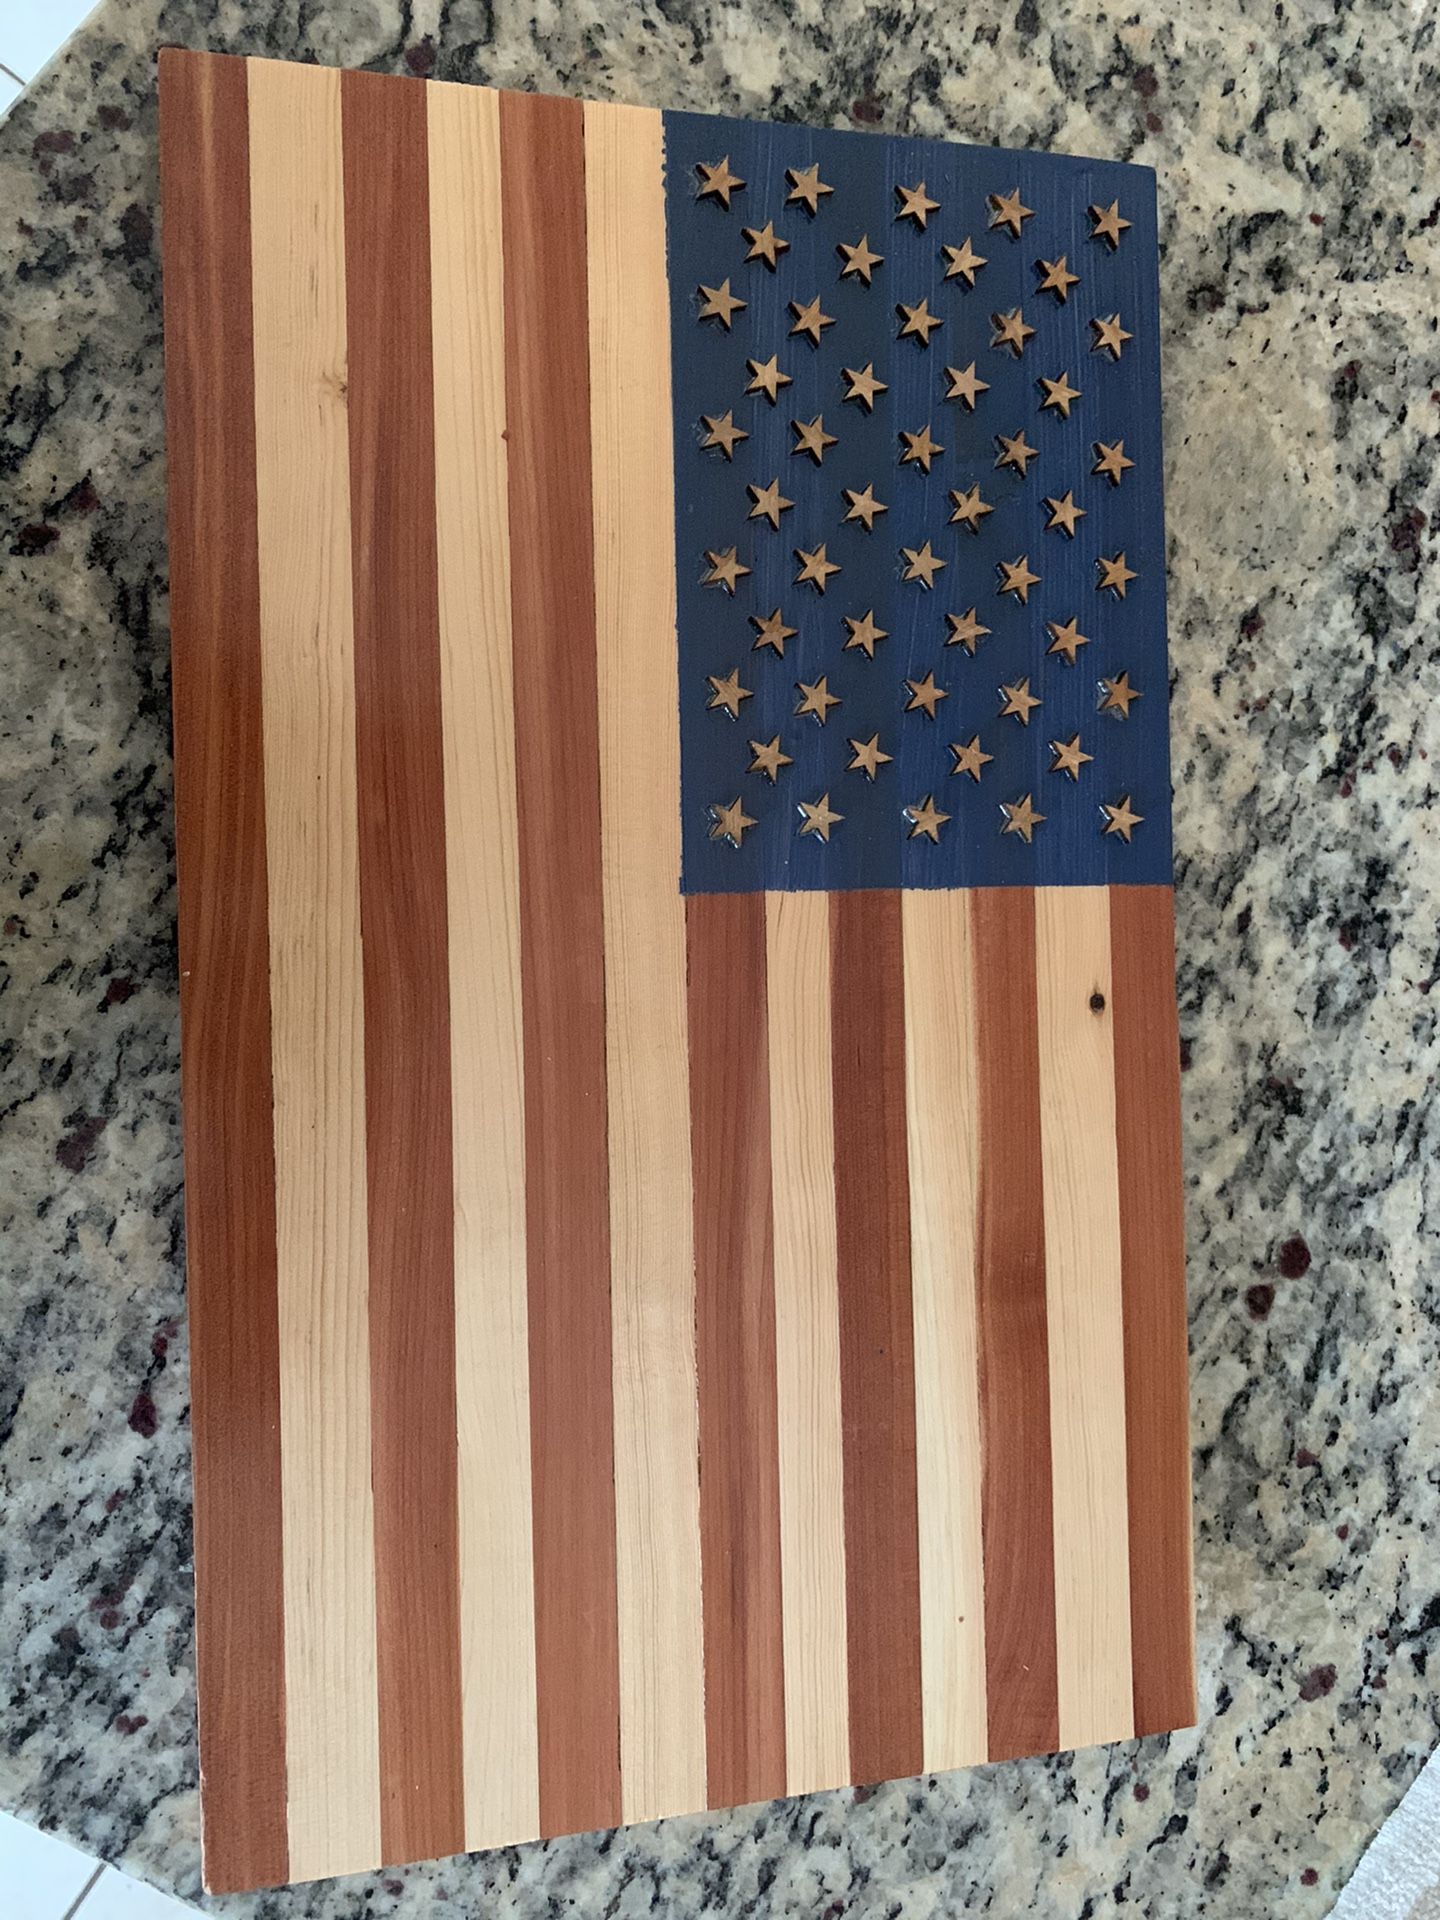 15” K x 9” W Hand Crafted Art Piece of American Flag on Wood for Wall Decor